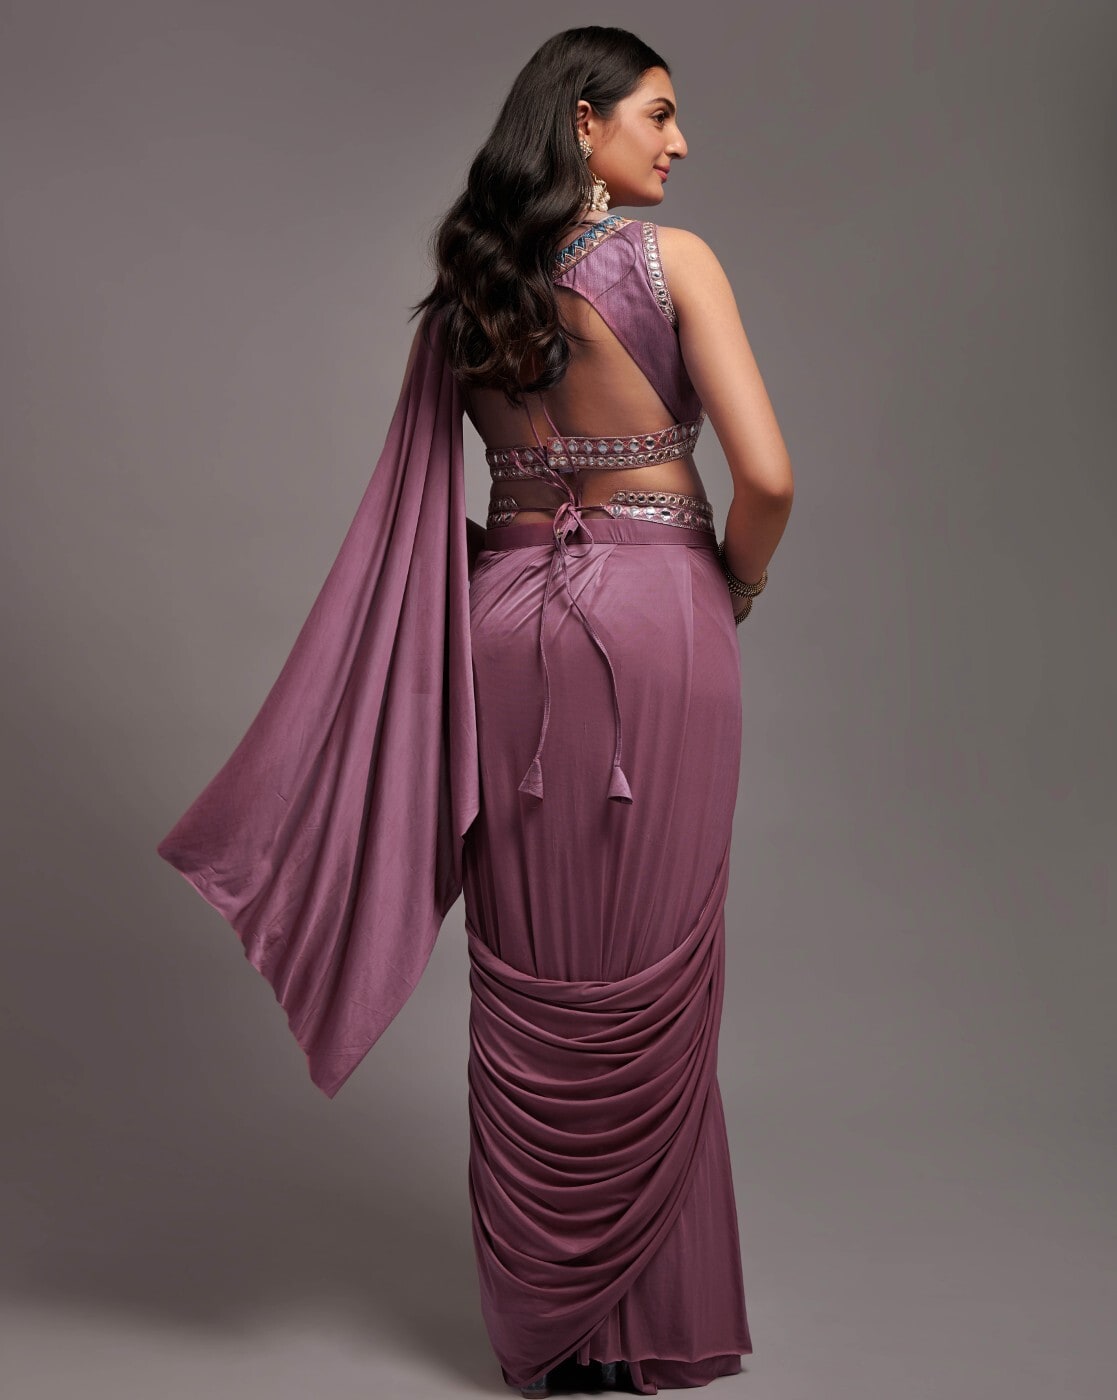 Gorgeous Lavender Color Ready To Wear Saree With Waist Belt – Fabvilla